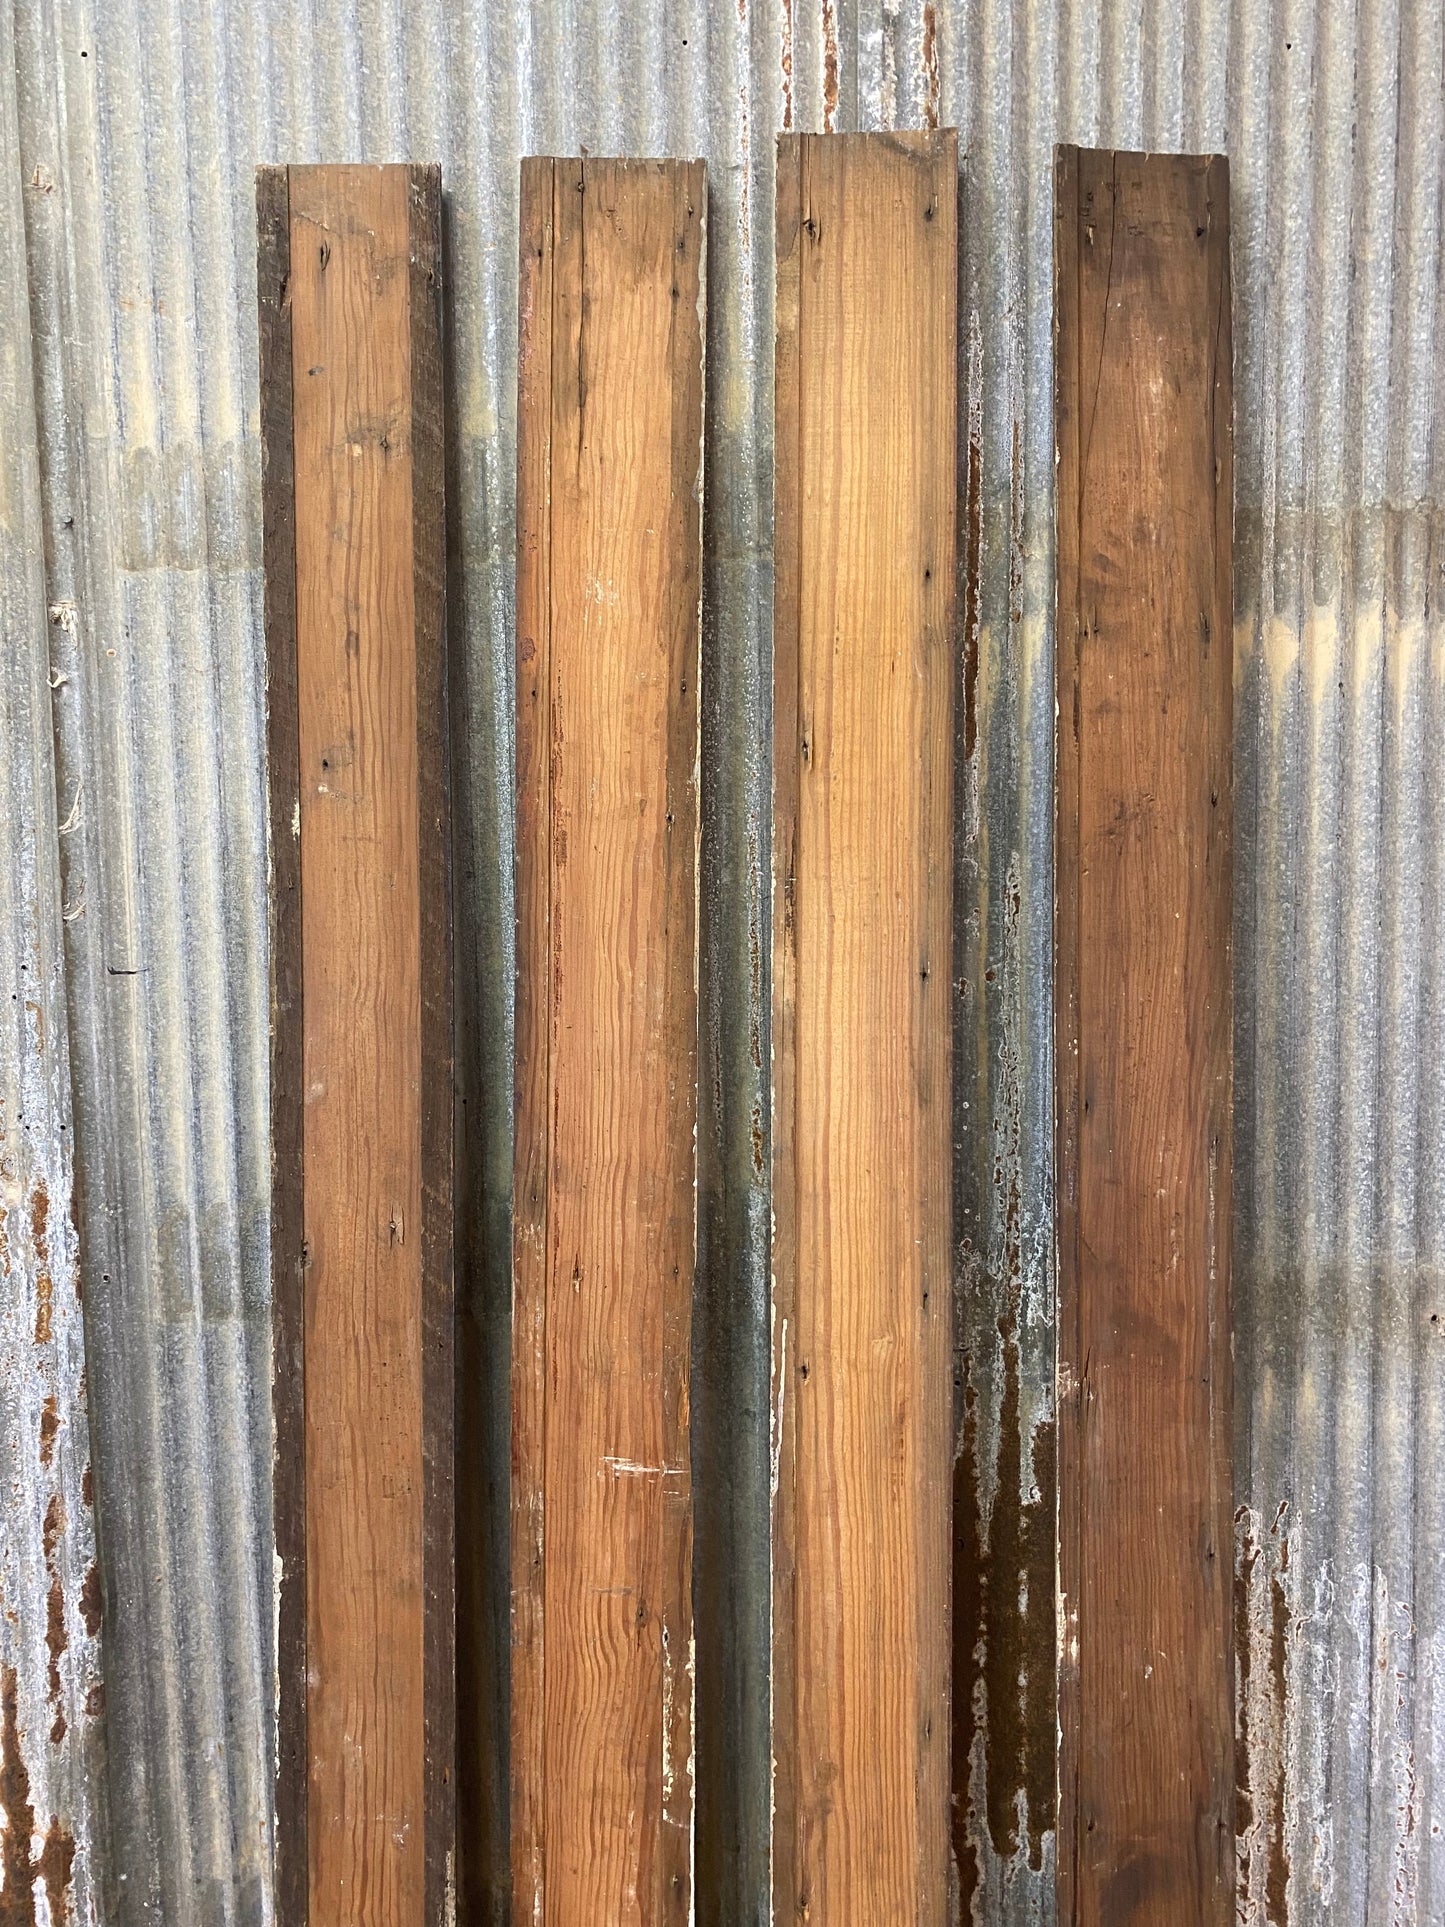 4 Reclaimed Wainscoting Bead Board Pieces, Architectural Salvage Vintage A37,